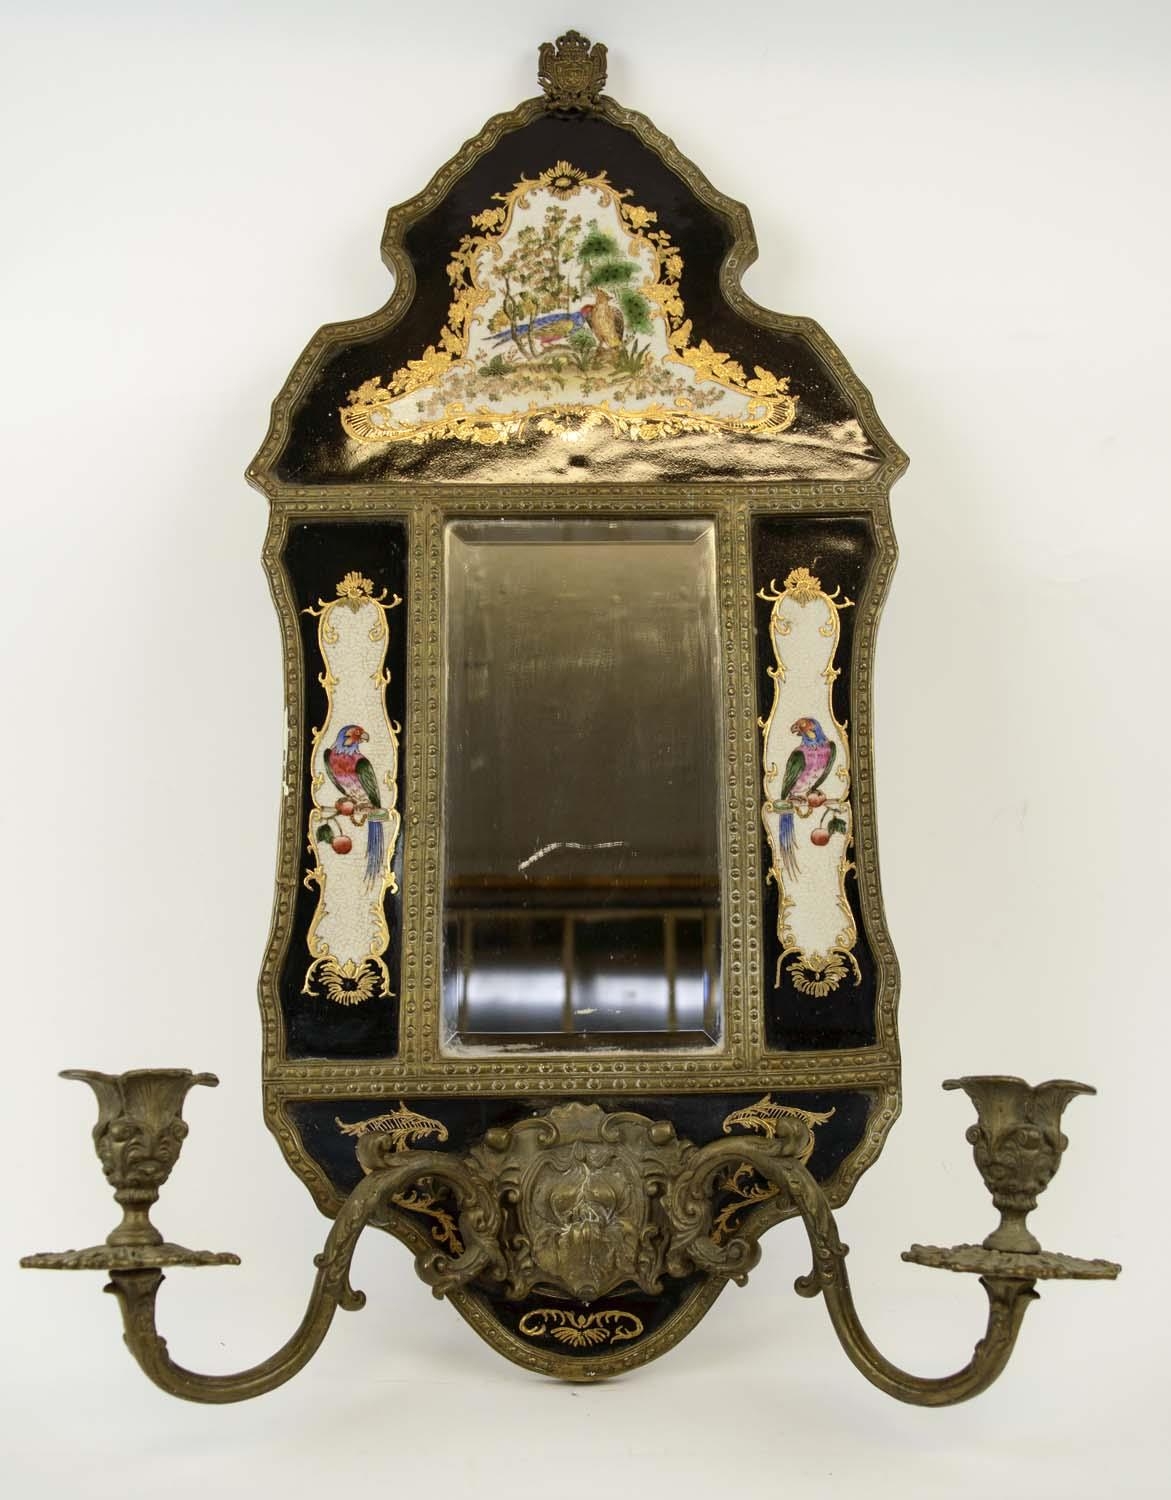 WALL SCONCES, a pair, 18th century Chinese export style, with ceramic inset famille noire panels, - Image 2 of 9